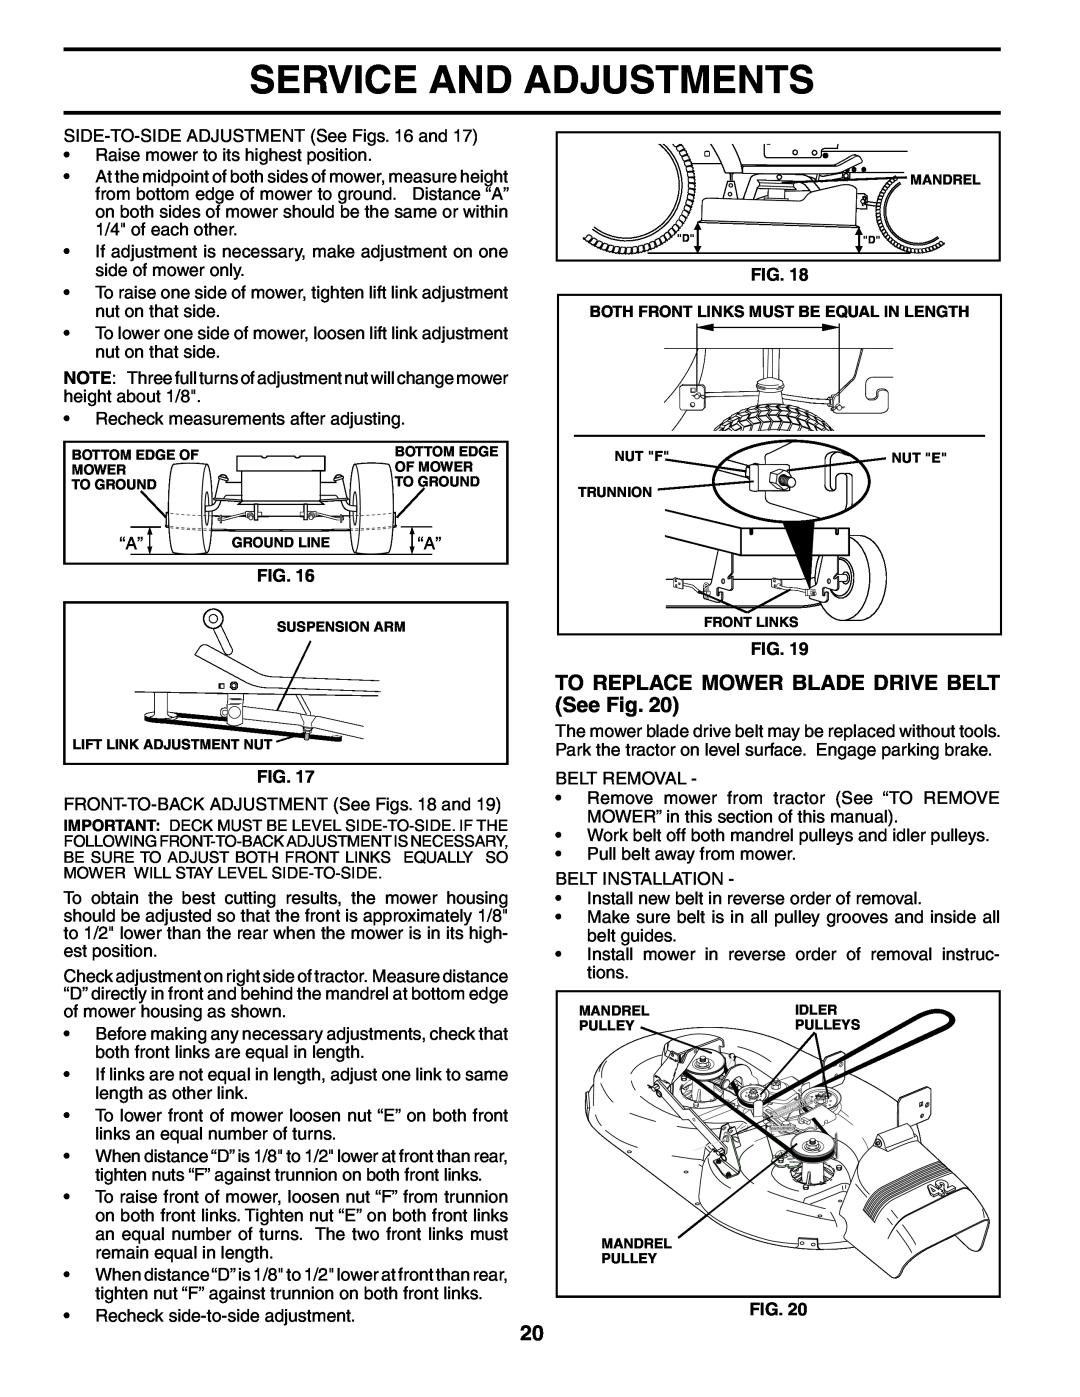 Poulan HDK19H42 manual TO REPLACE MOWER BLADE DRIVE BELT See Fig, Service And Adjustments 